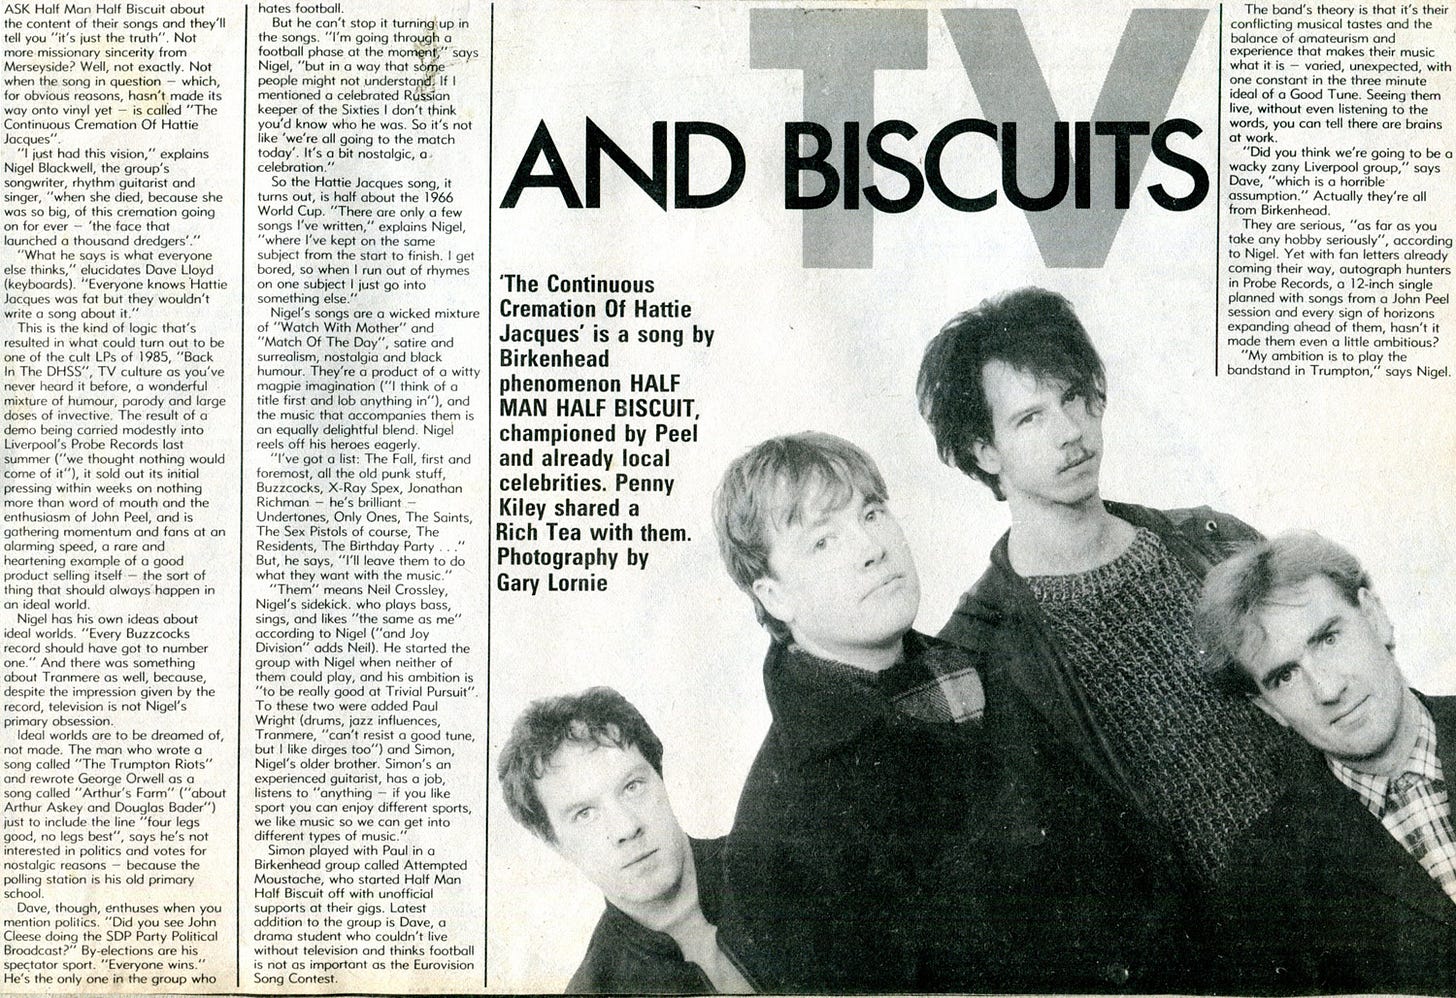 The original cutting, with a photo of the band. Full text is in the post below.